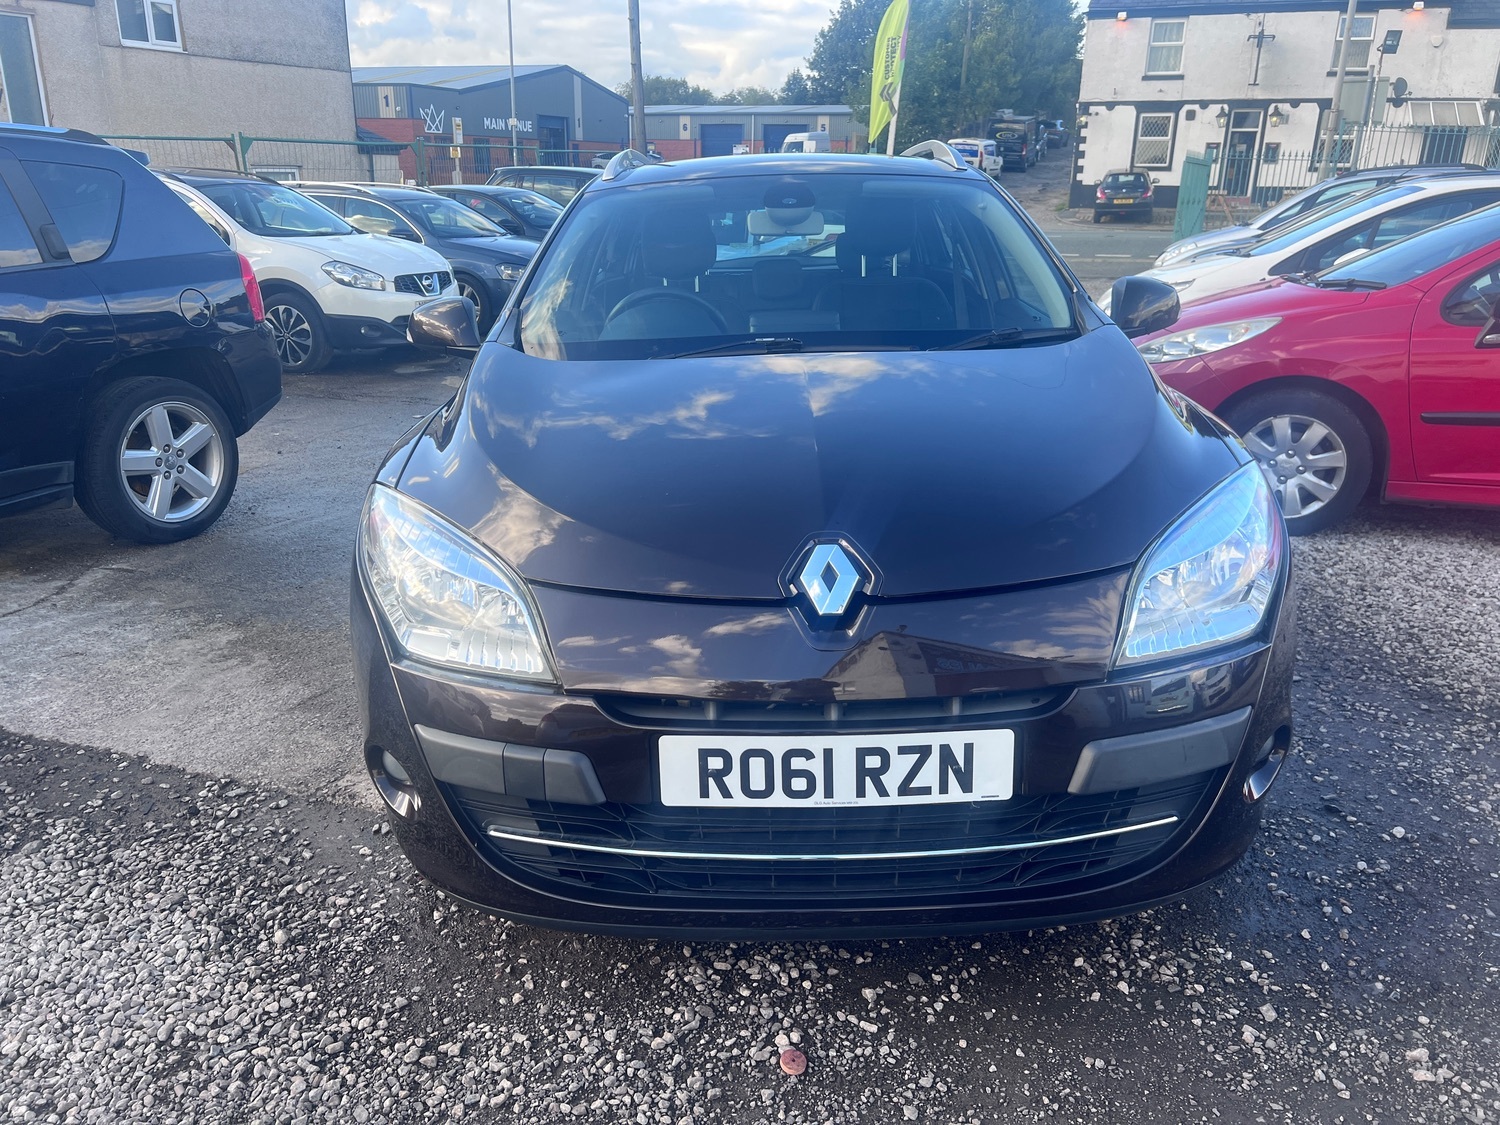 Used RENAULT MEGANE in Bolton, Greater Manchester